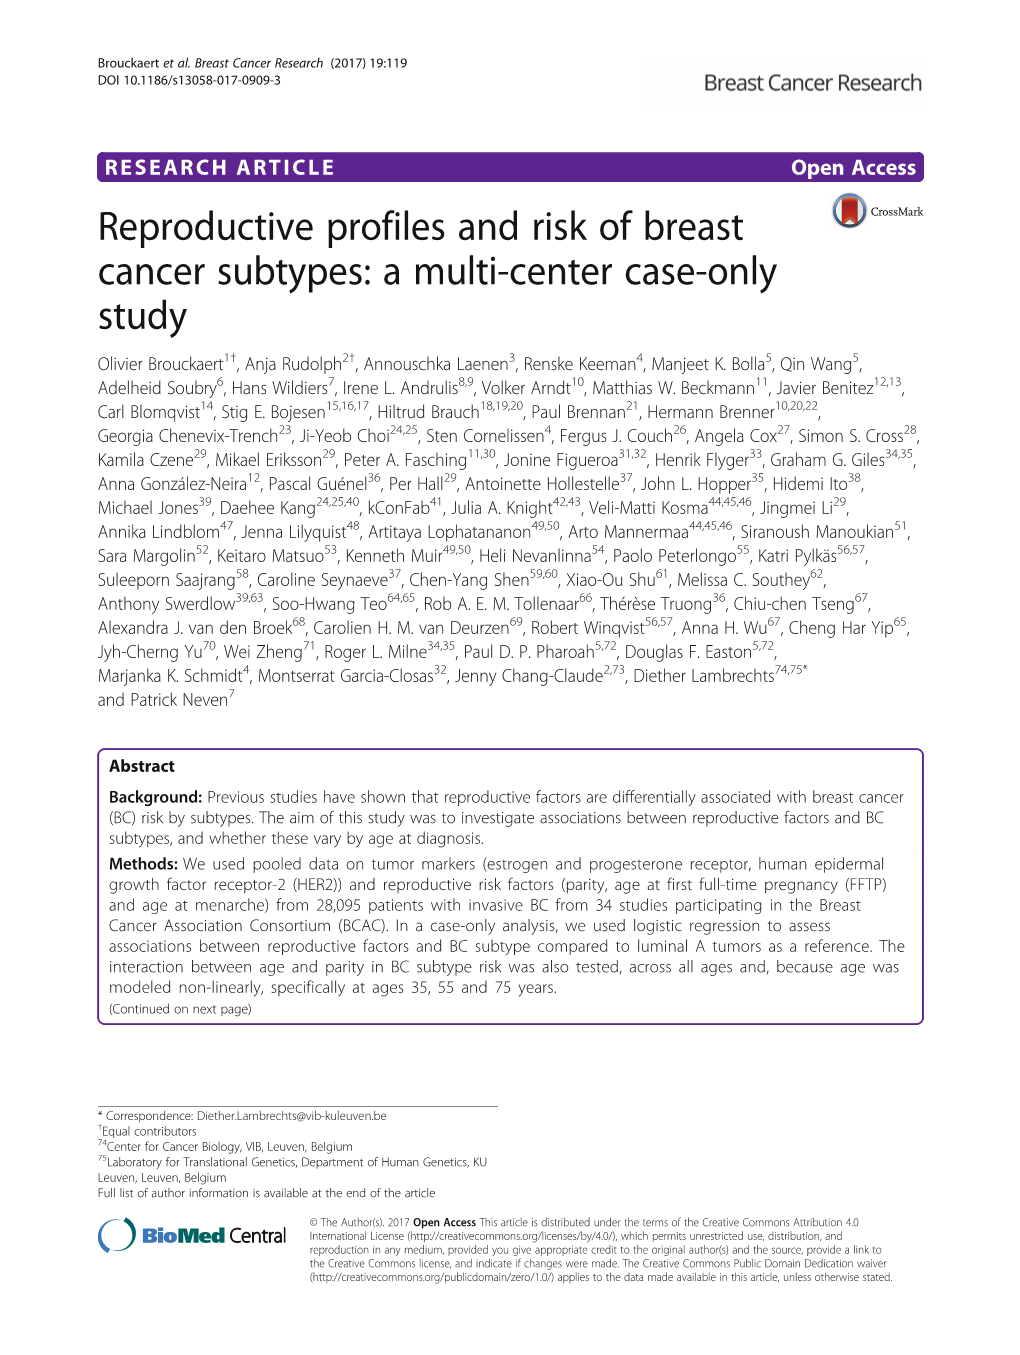 Reproductive Profiles and Risk of Breast Cancer Subtypes